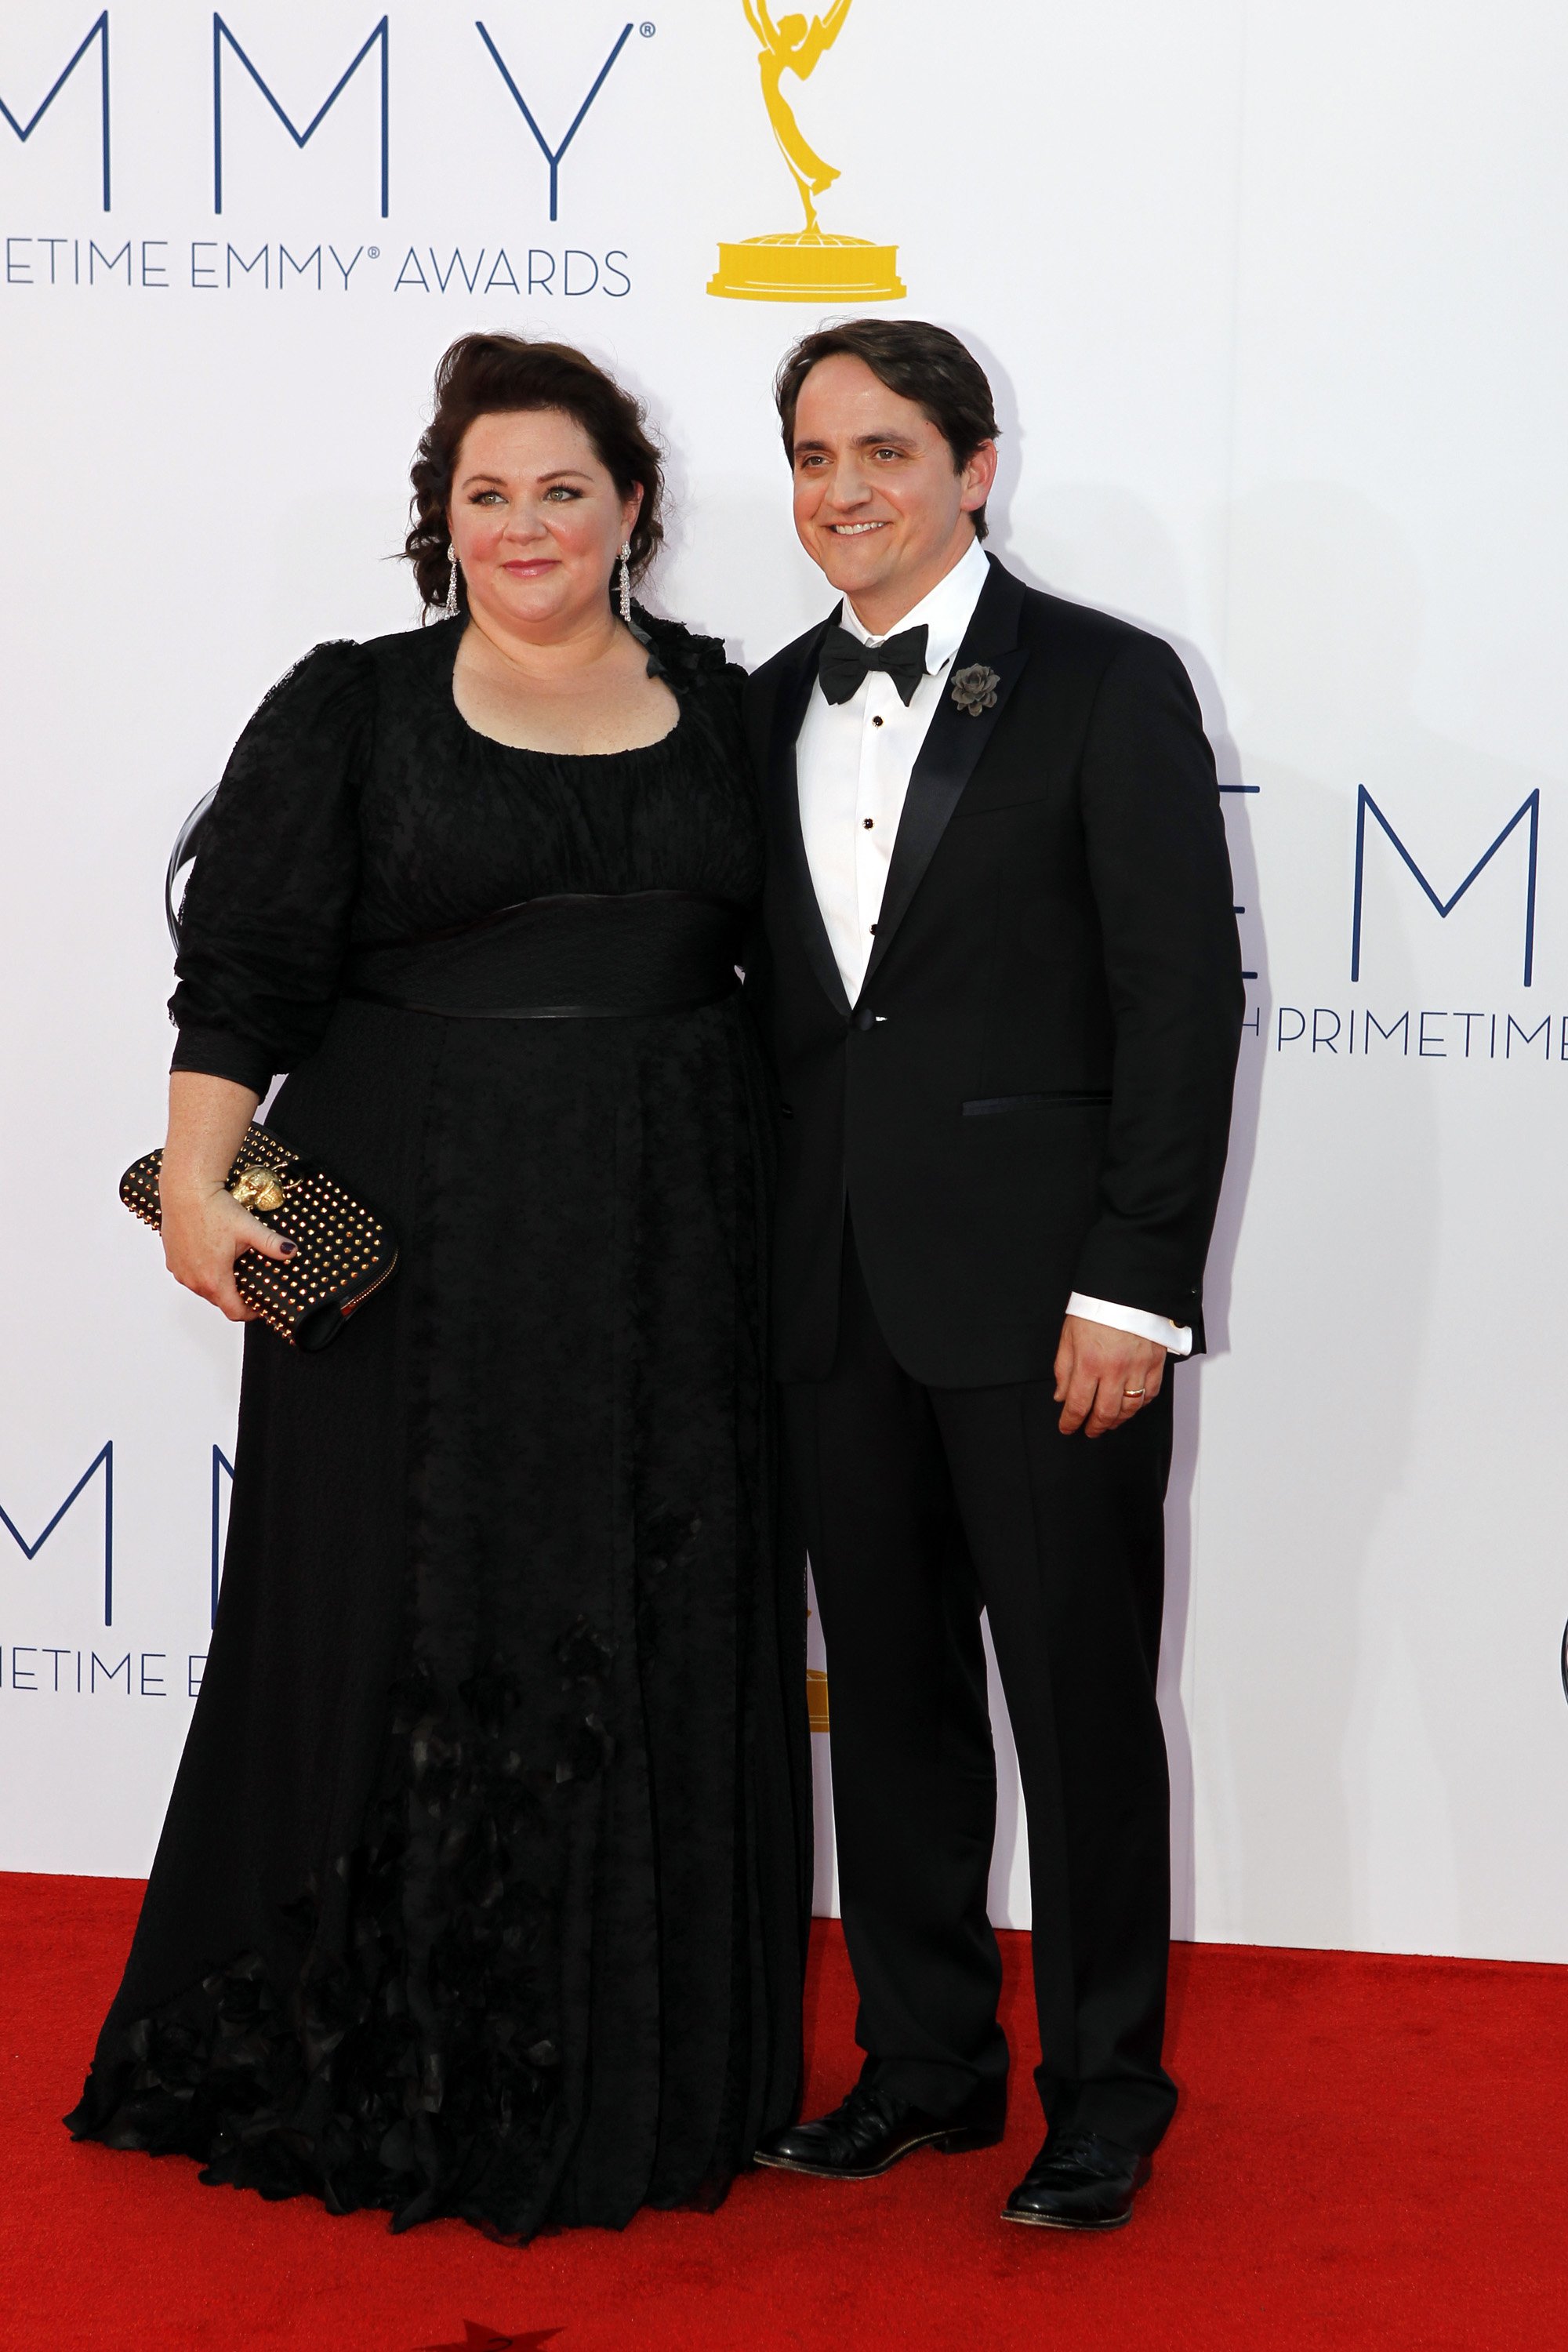 Melissa McCarthy and Ben Falcone at the 64th Primetime Emmy Awards on September 23, 2012. | Source: Getty Images